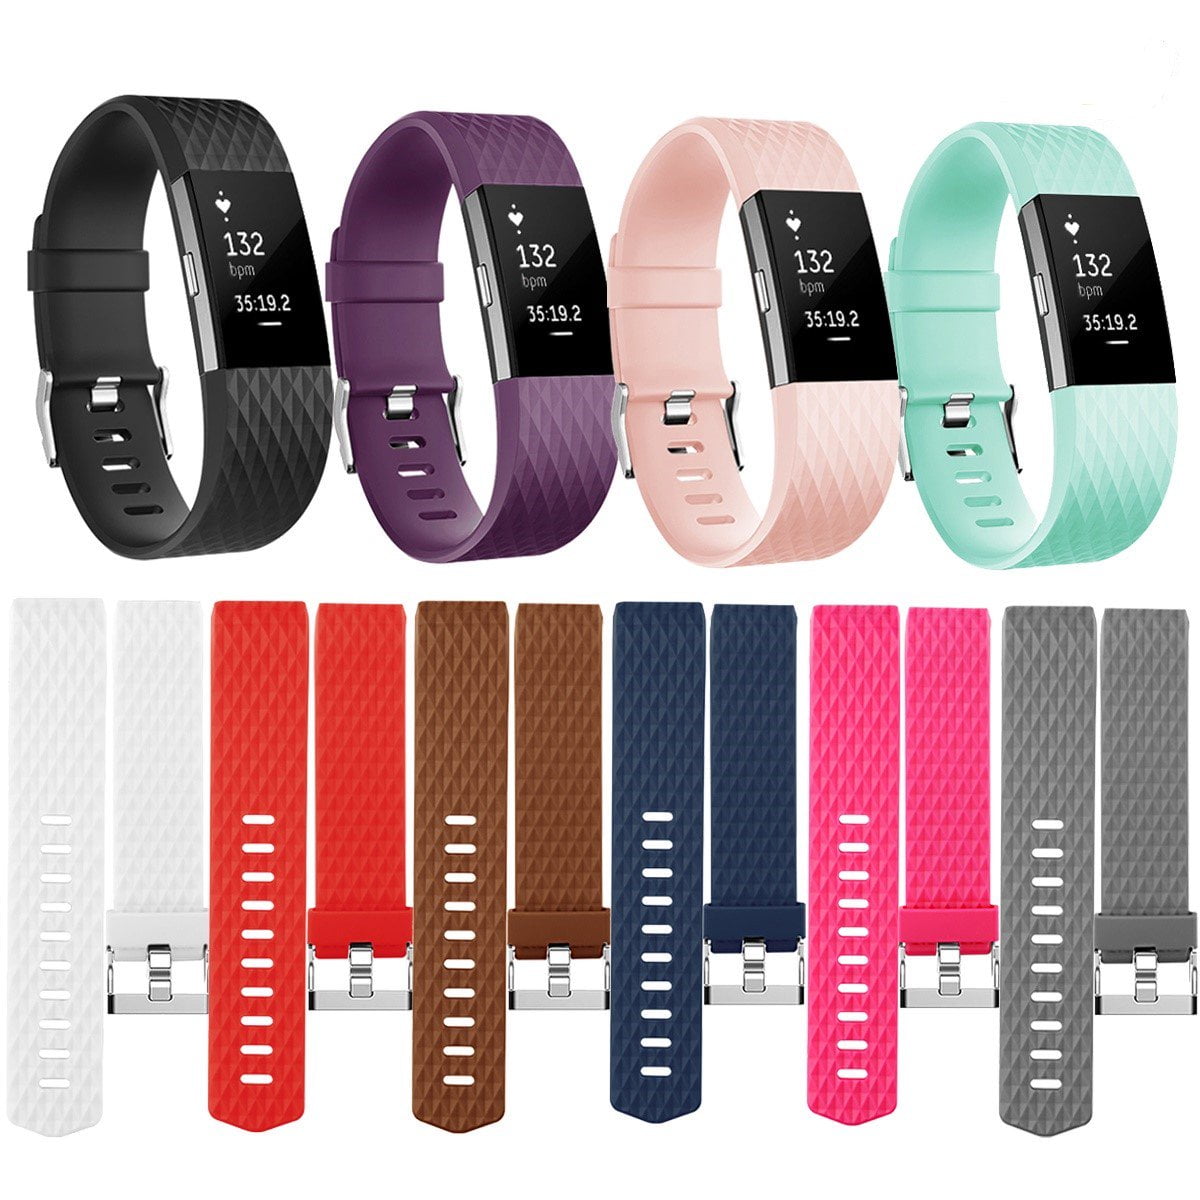 18 Security Band Clasp Clip Keeper Ring Loop Fastener For Fitbit Charge 